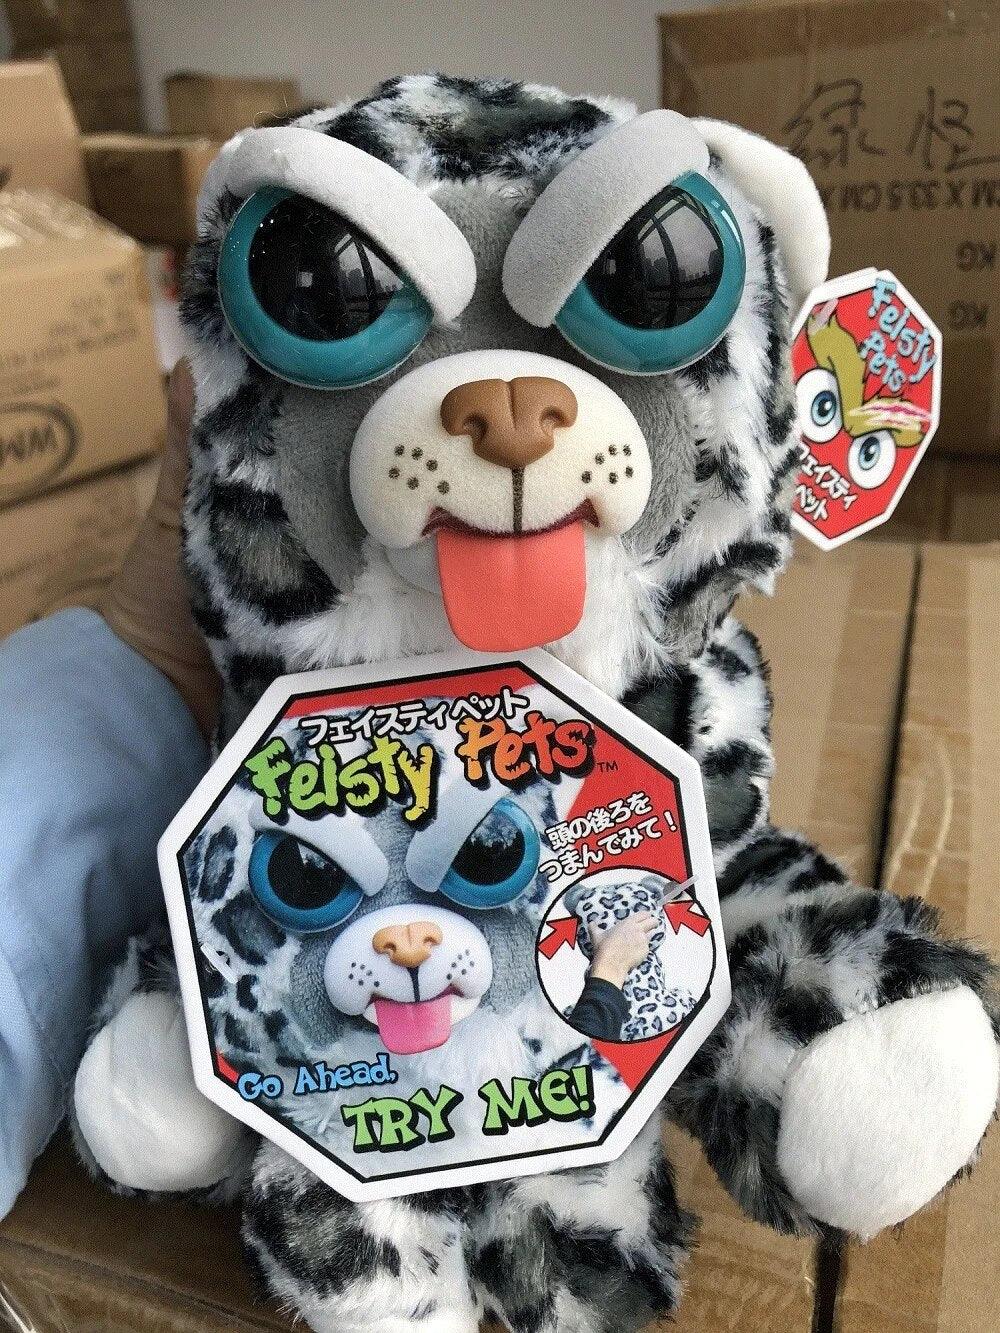 Feisty Pets funny face changing soft toys for children snow leopard stuffed plush unicorn angry animal dog doll bear panda - Brand My Case